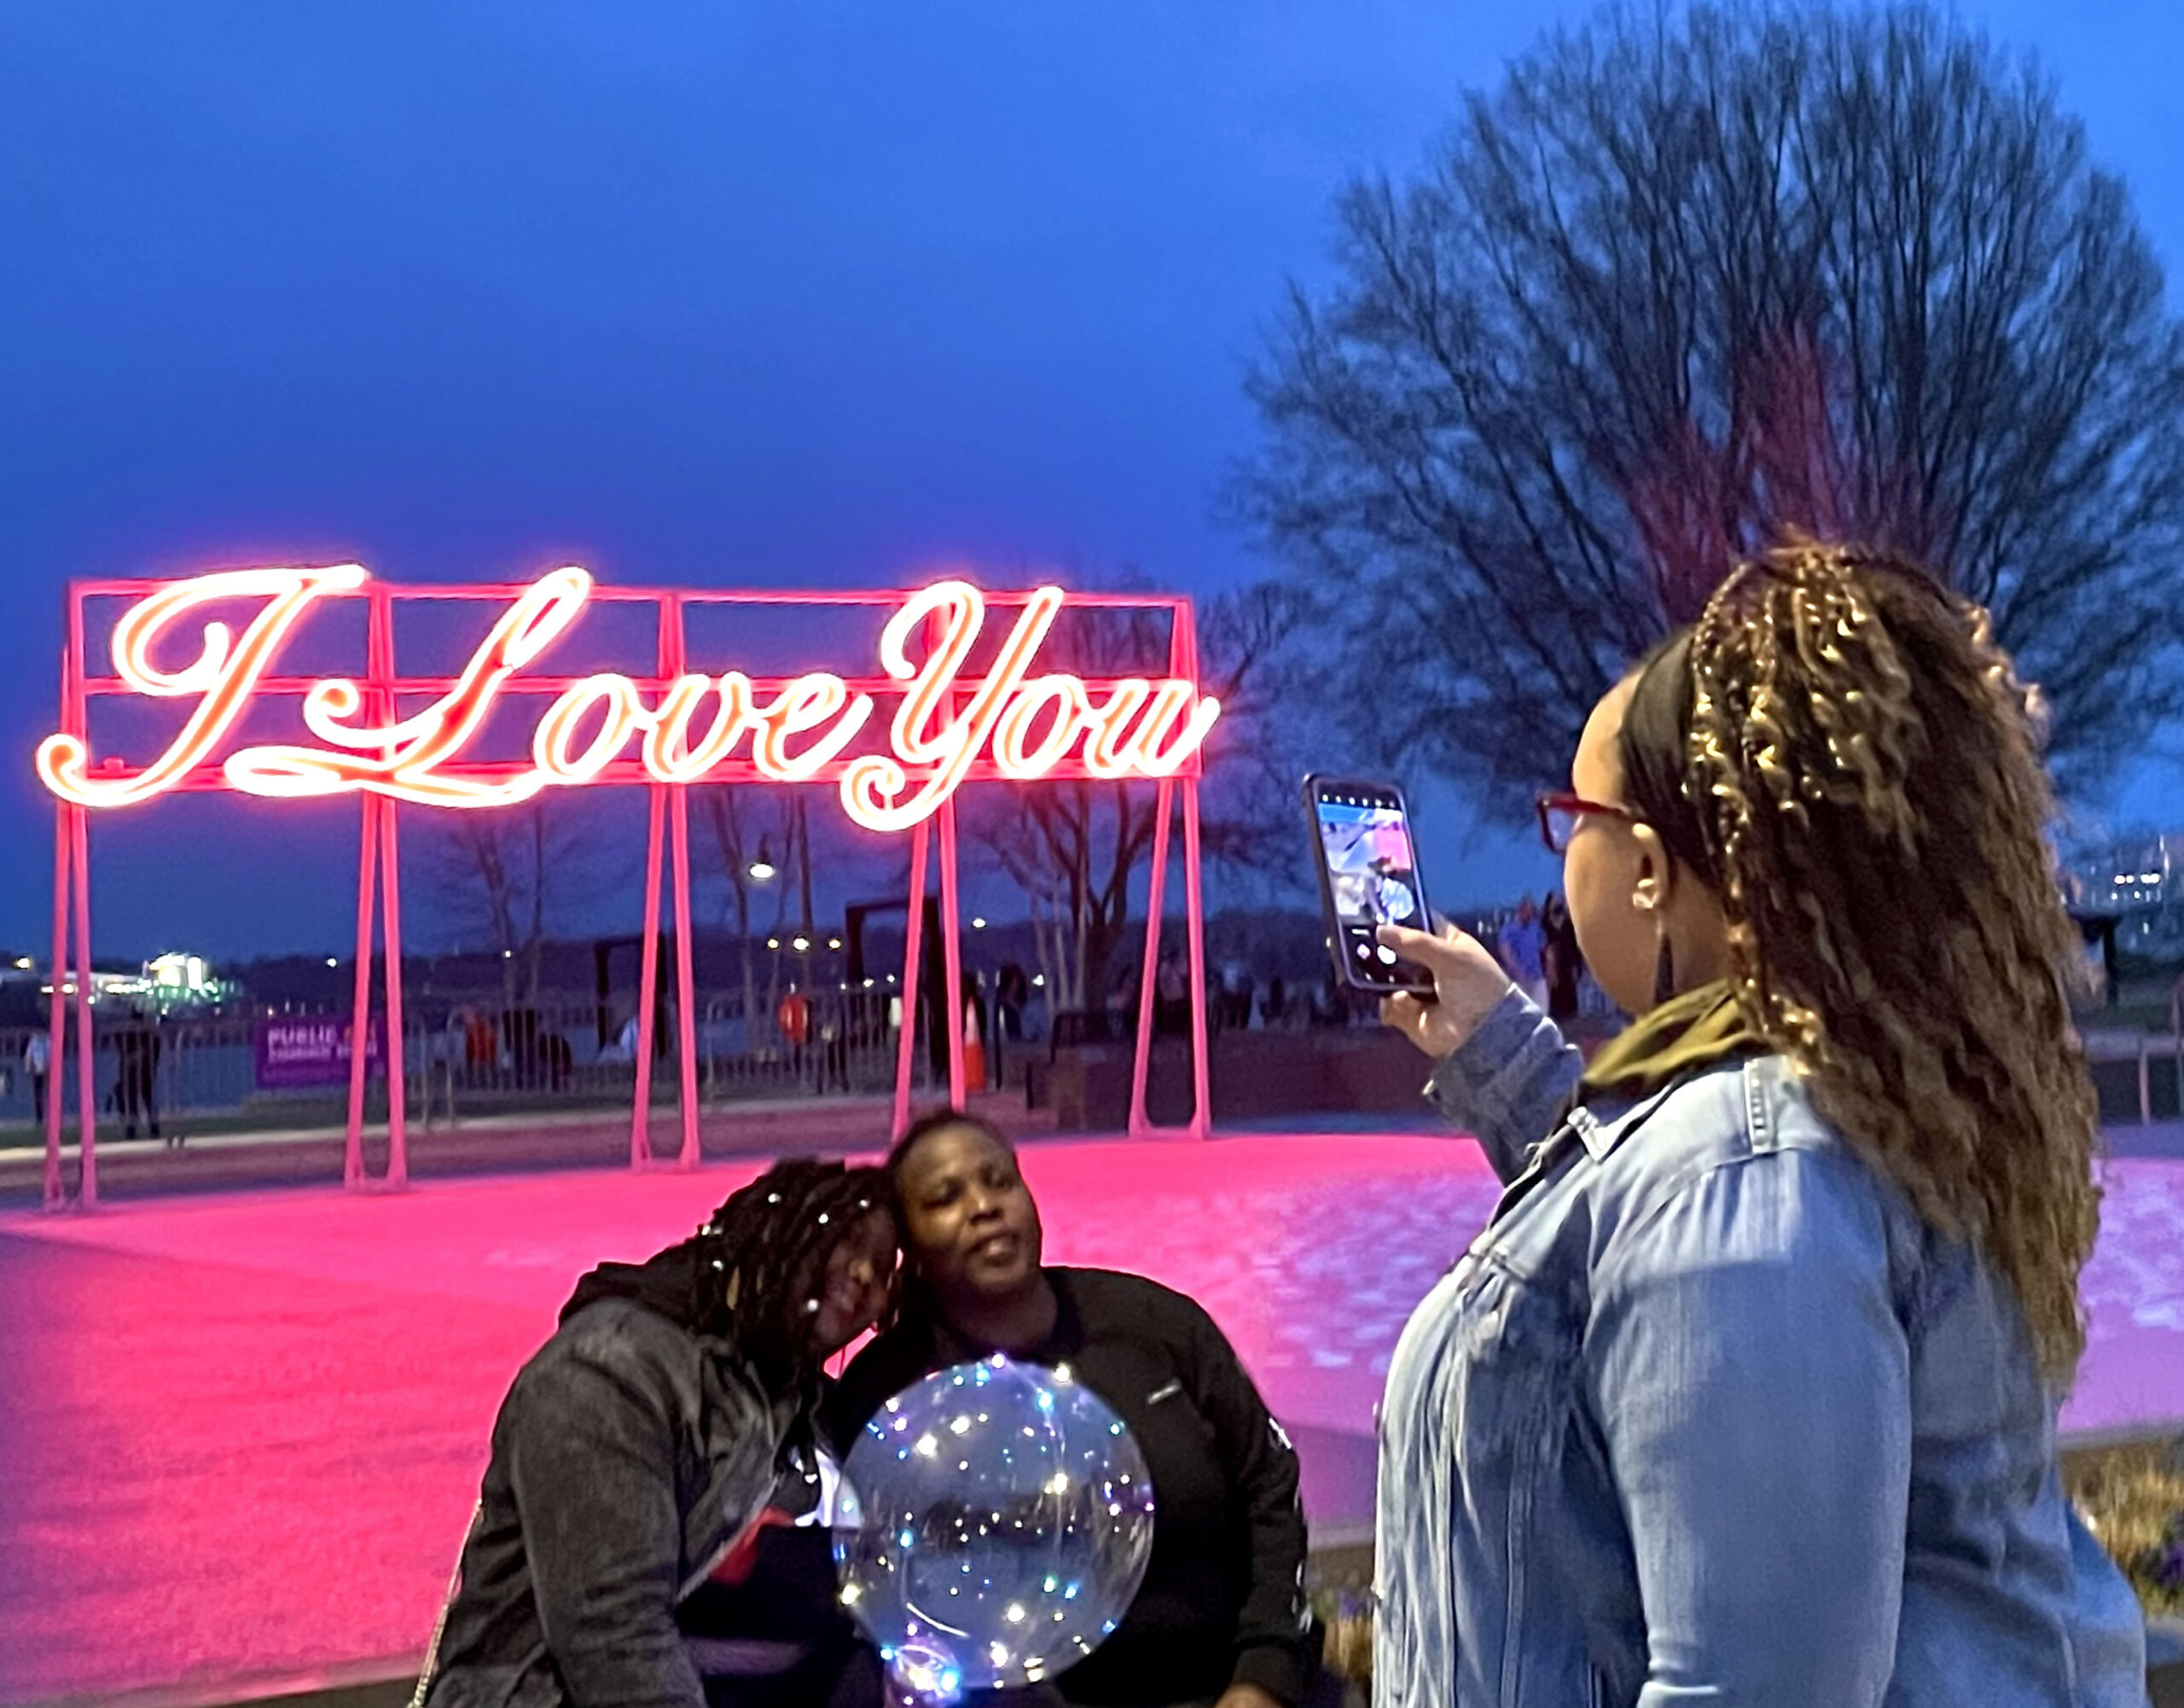 A woman with braids in the foreground taking a photograph of a couple standing in front of a neon pink sign that reads "I Love You"